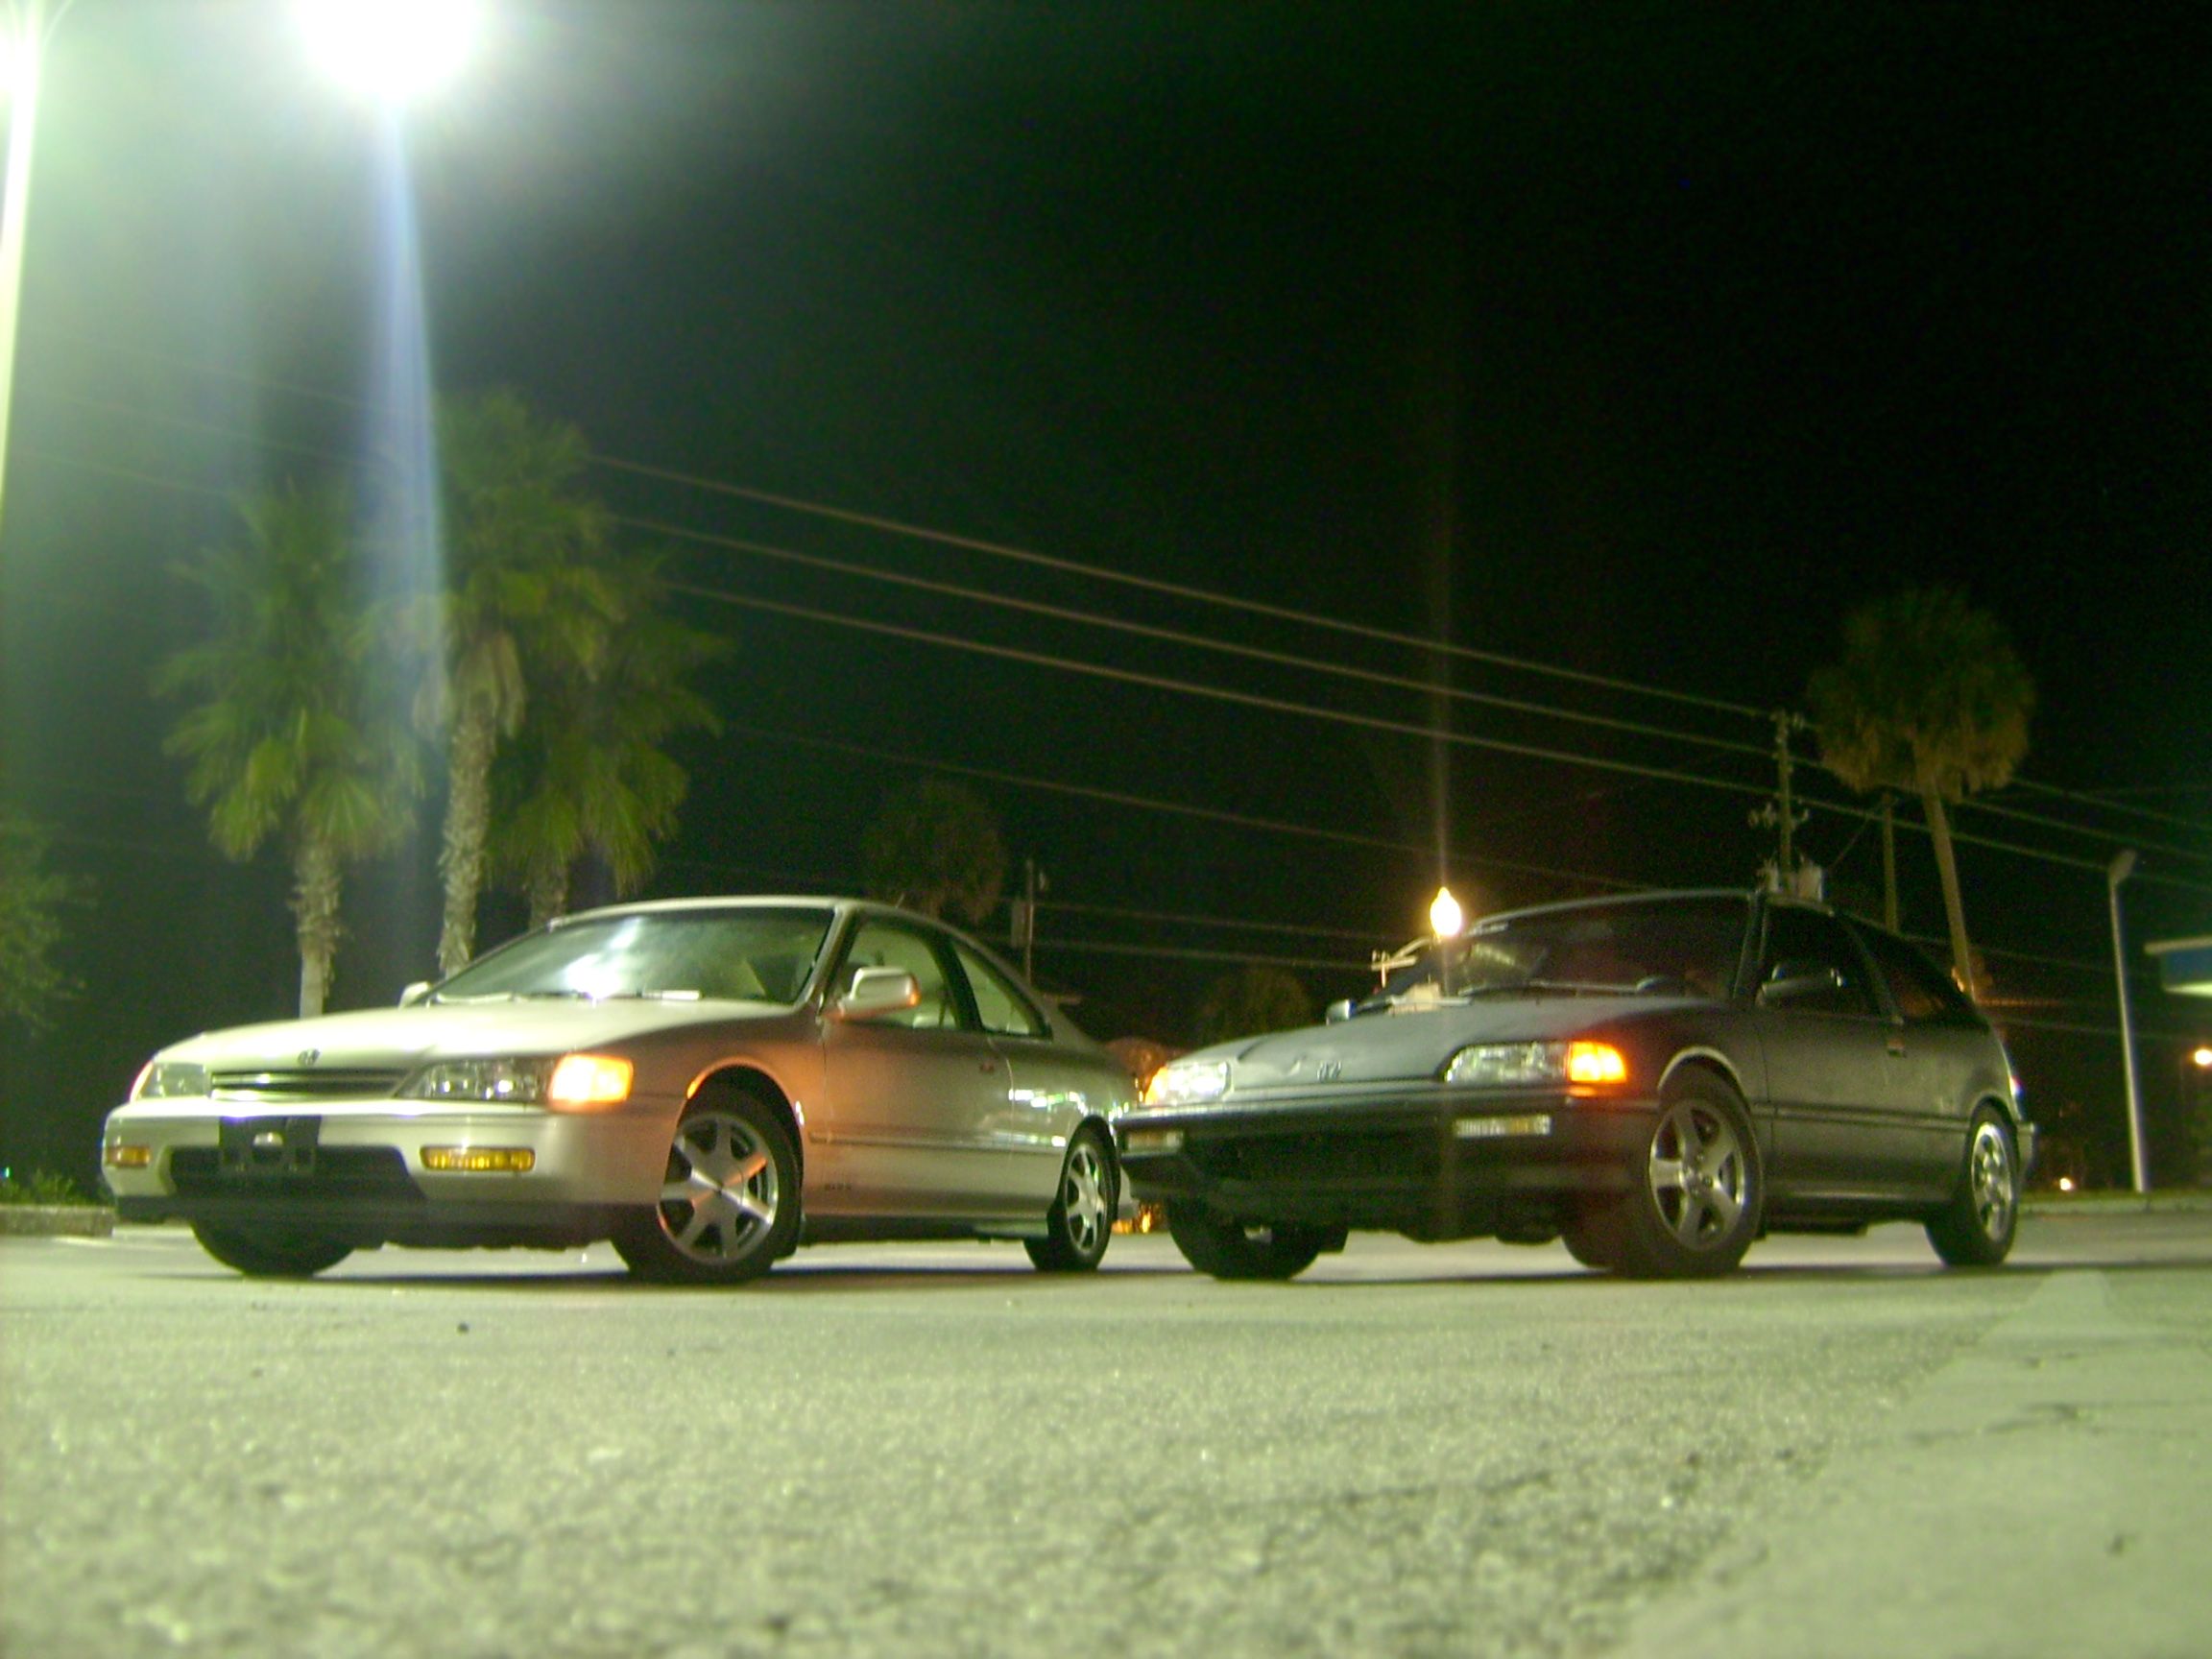 My 95 accord and Cousins 91 ef hatch